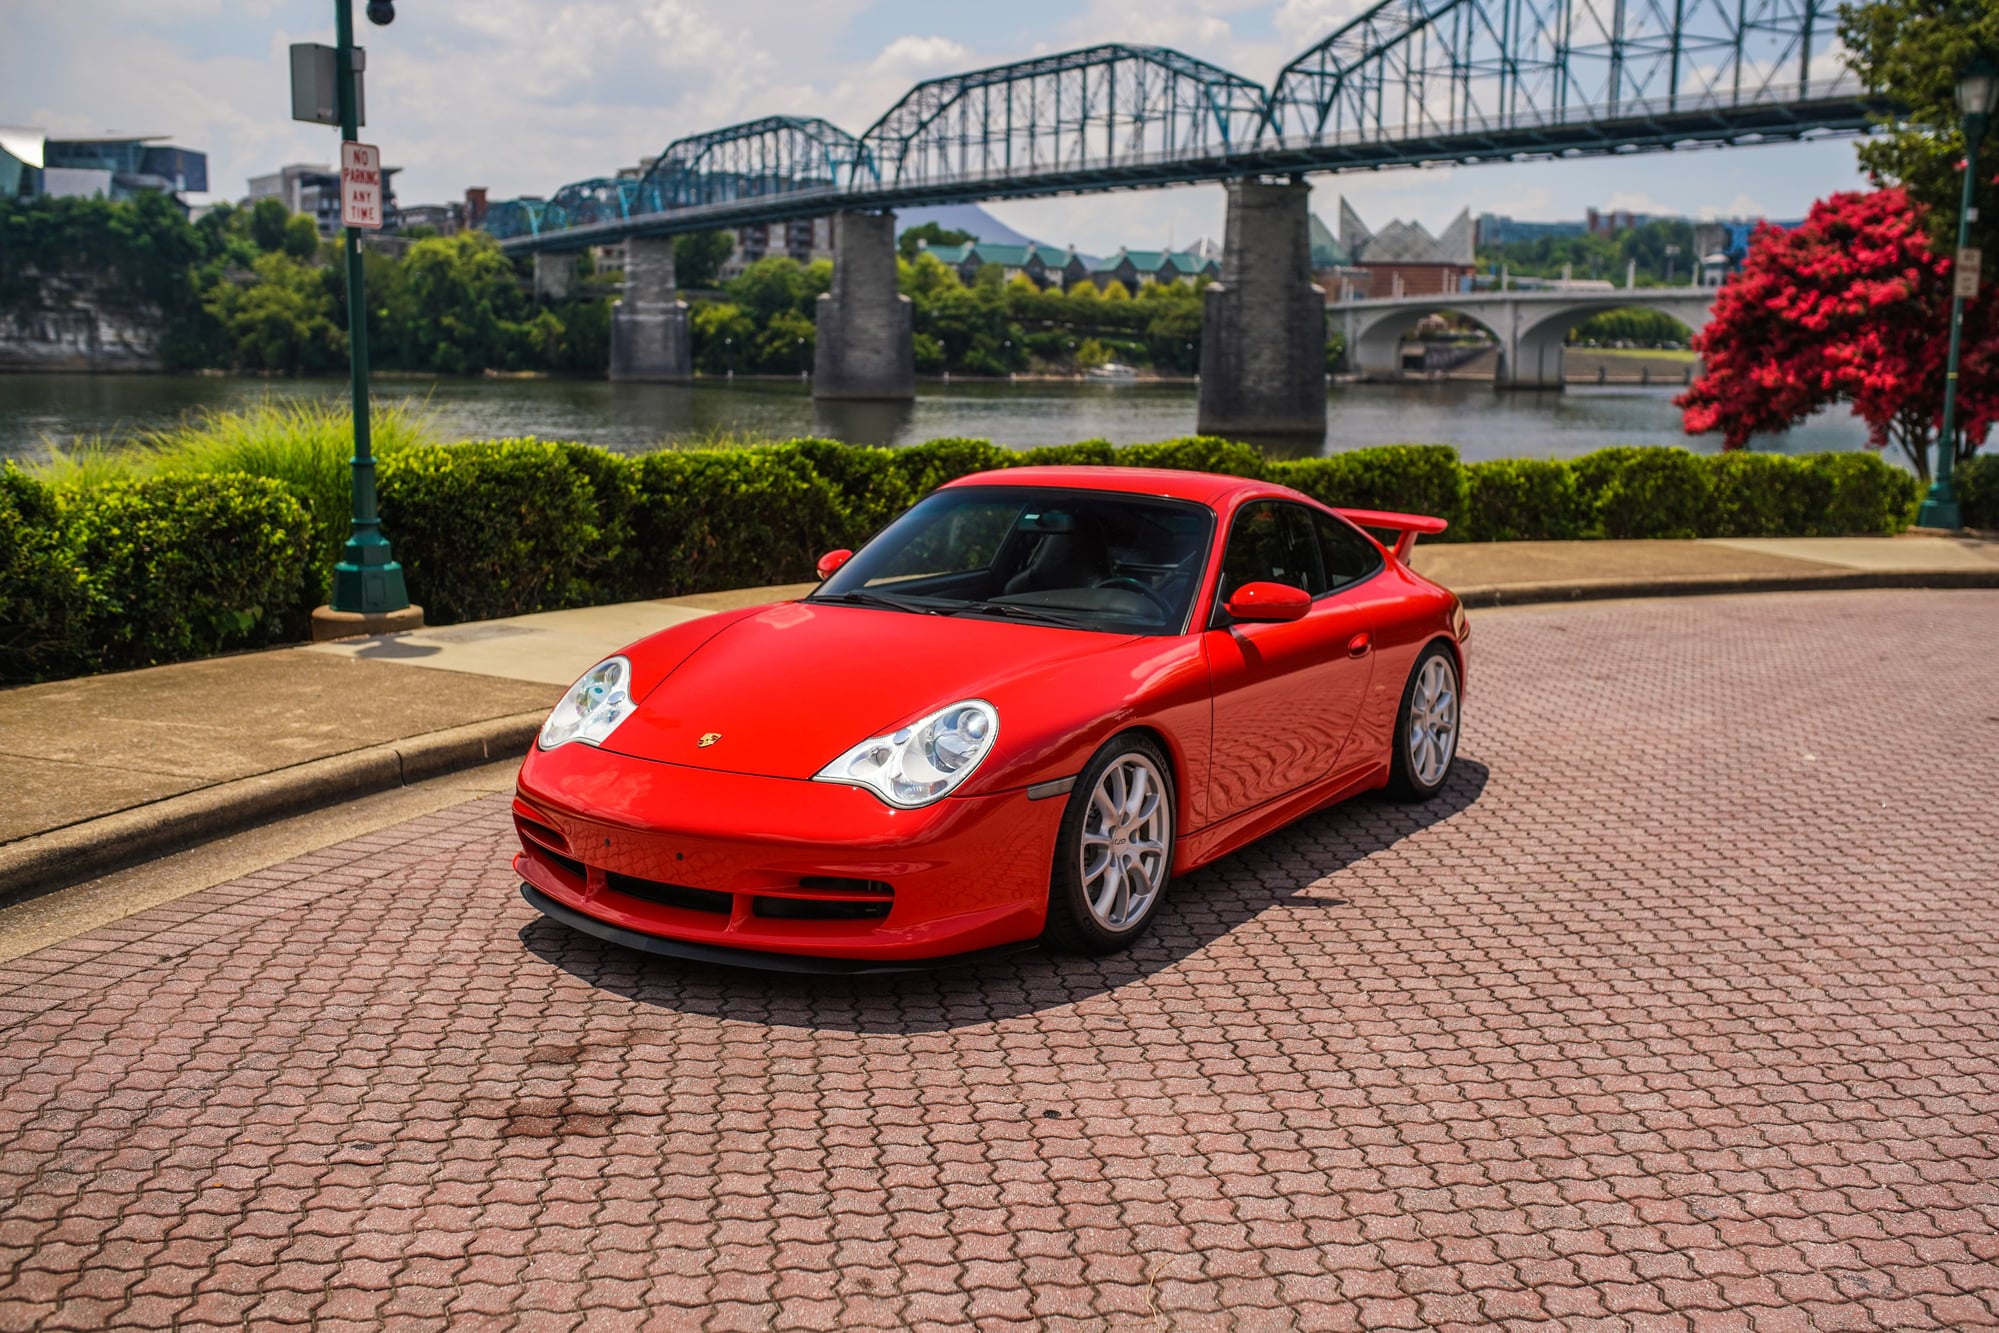 2004 Porsche GT3 -  - Used - VIN WP0AC299X4S692903 - 74,000 Miles - 6 cyl - Manual - Red - Chattanooga, TN 37363, United States